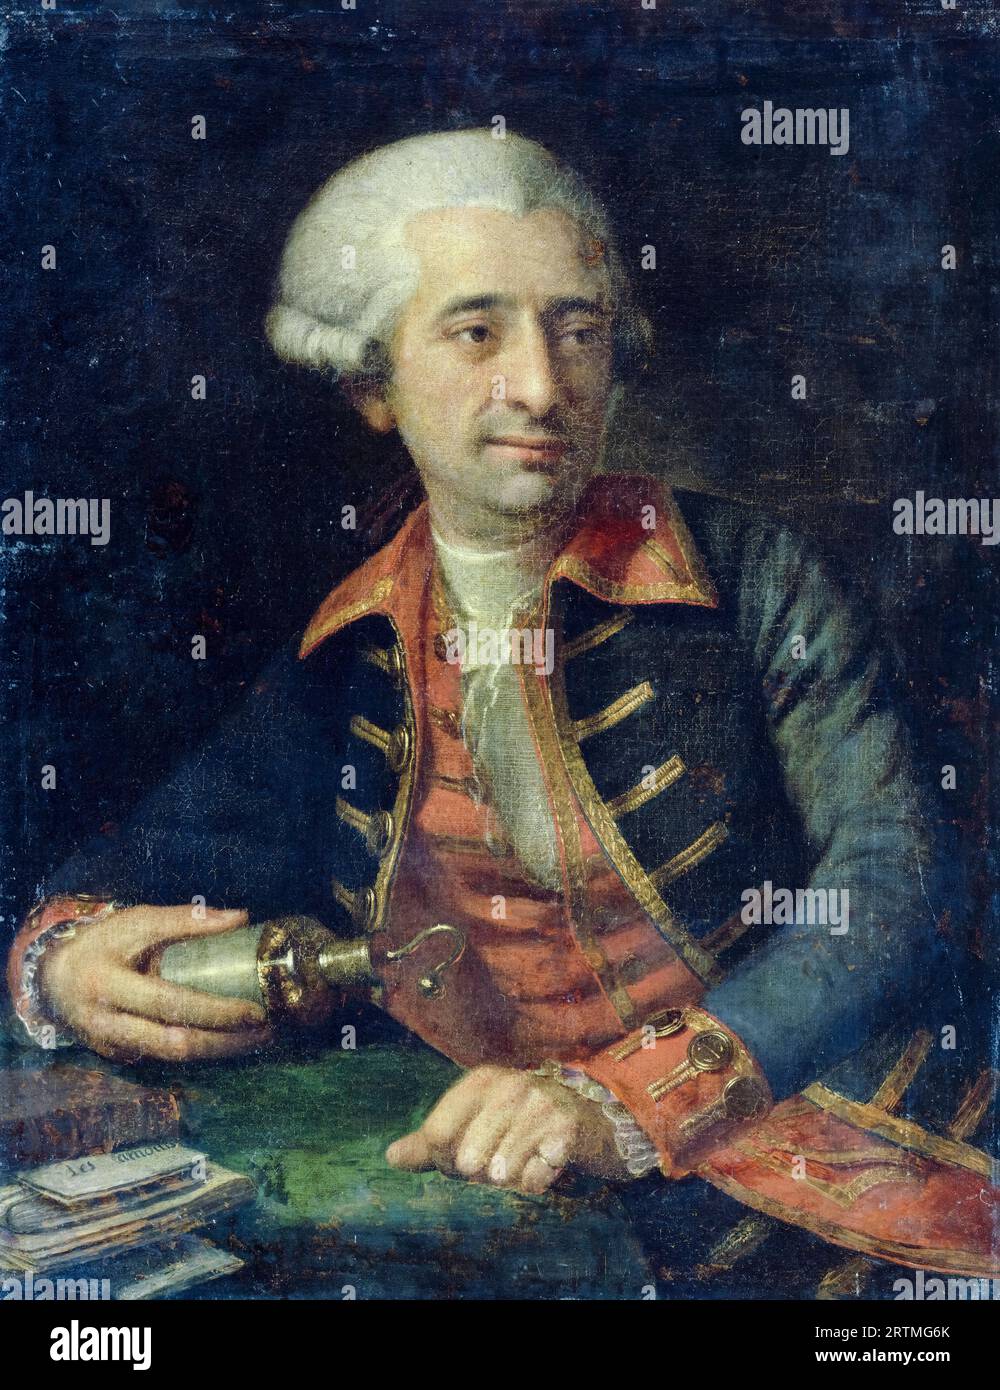 Antoine Lavoisier (1743-1794), French nobleman and chemist in the uniform of inspector general of gunpowder for land and sea armies, portrait painting in oil by François-Louis Brossard de Beaulieu or Marie-Renée-Geneviève Brossard de Beaulieu, 1784 Stock Photo